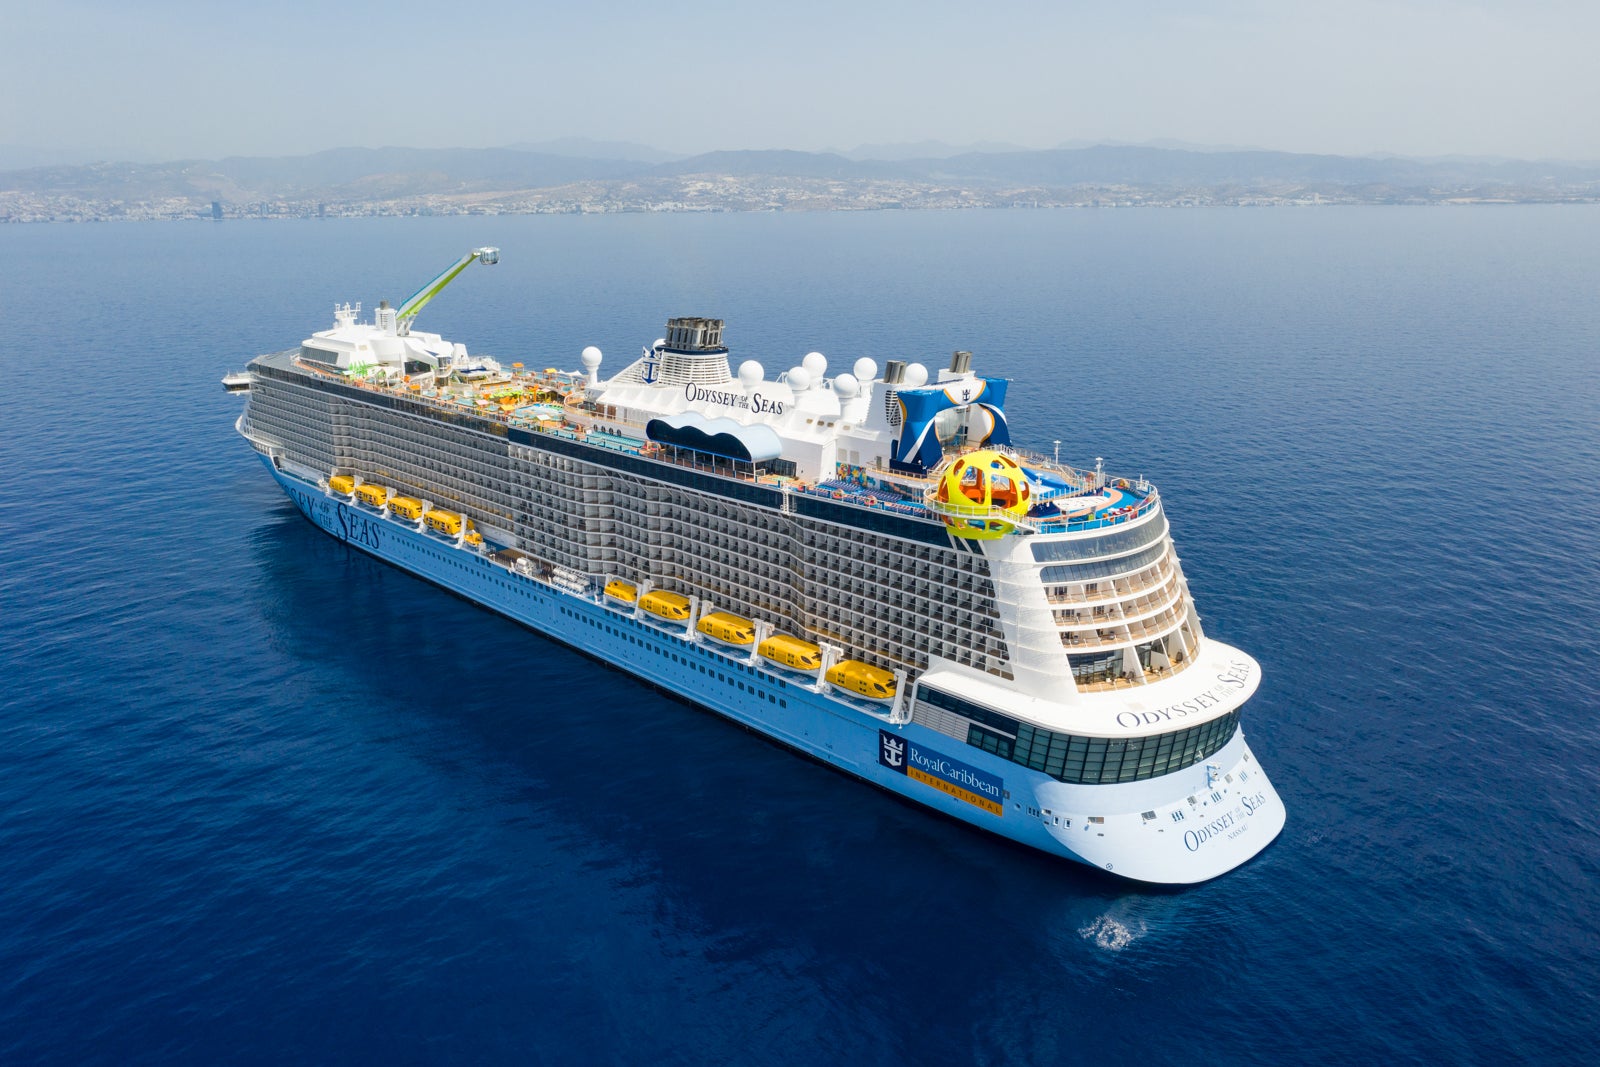 royal caribbean cruise ships ranked by size from biggest to smallest — the complete list